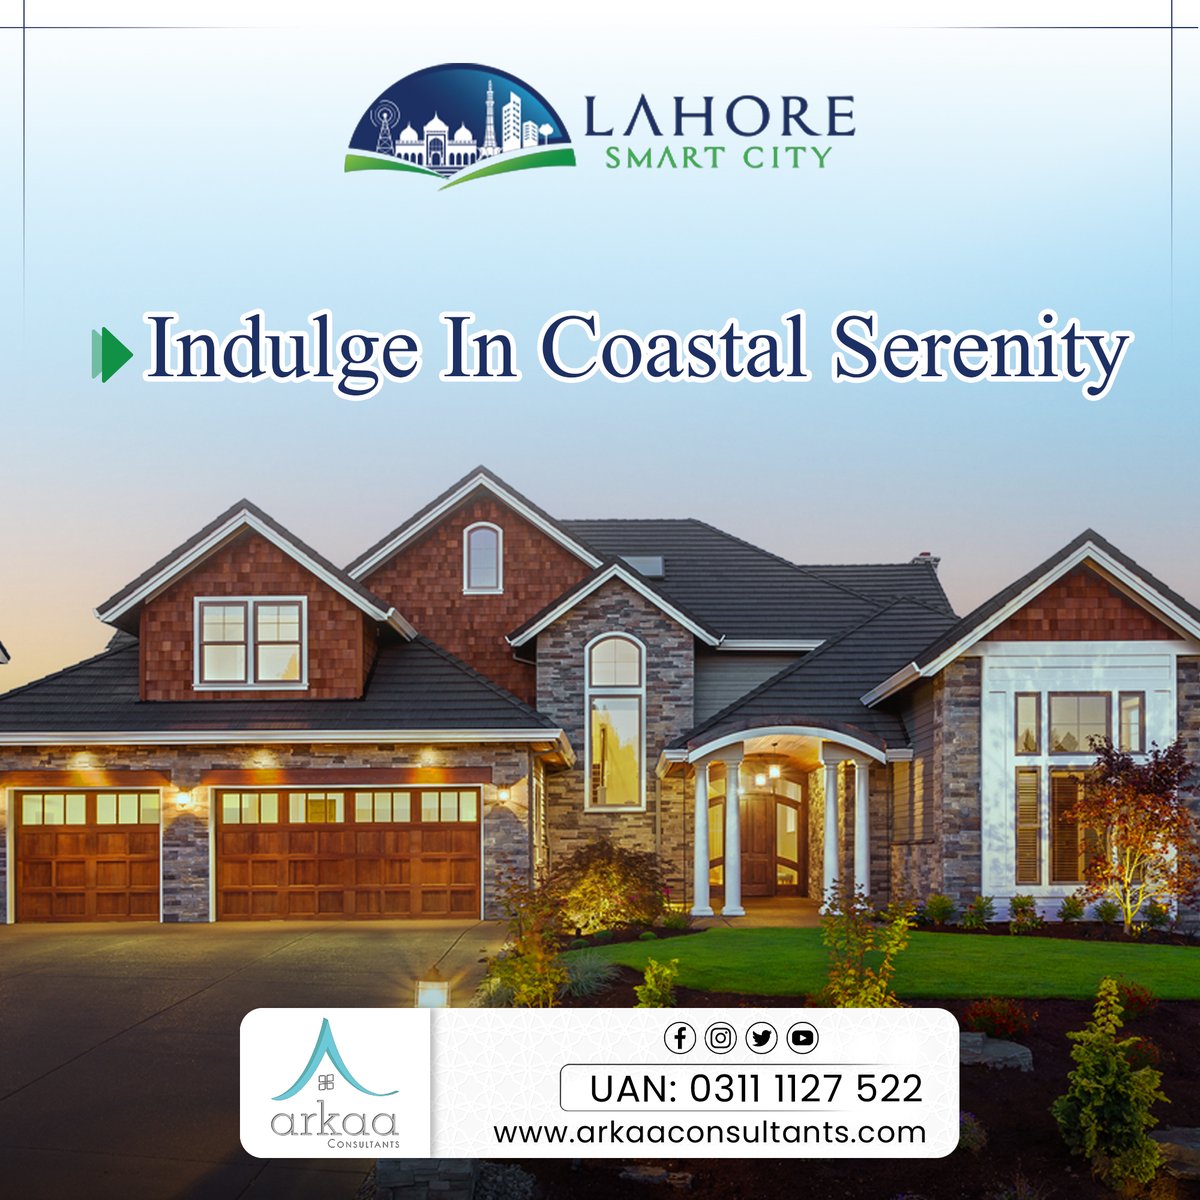 Escape to a world of coastal serenity at Lahore Smart City! 

#Arkaa #lahoresmartcity #arkaaconsultants #smartinterchange #SmartCities #lscresidential #StayTuned #nextbigthing #lsc #lahore #amazingarchitecture #Progressivesociety #coastalserenity #modernliving #perfectblend